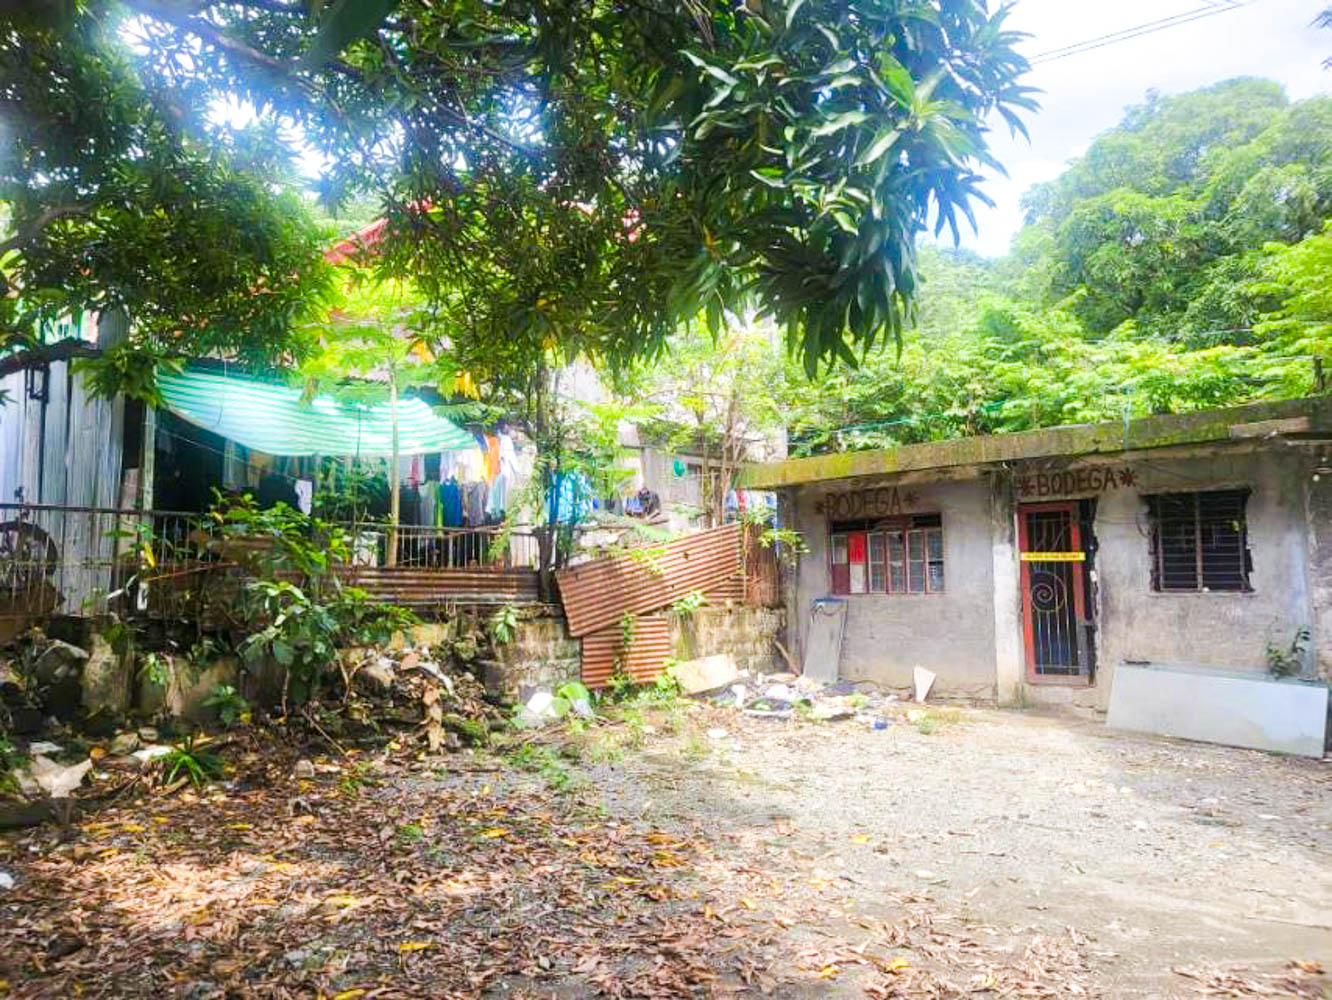 1054 sqm Vacant Lot with 2 Storey House for Lease in Nieves Hills, Angono Rizal